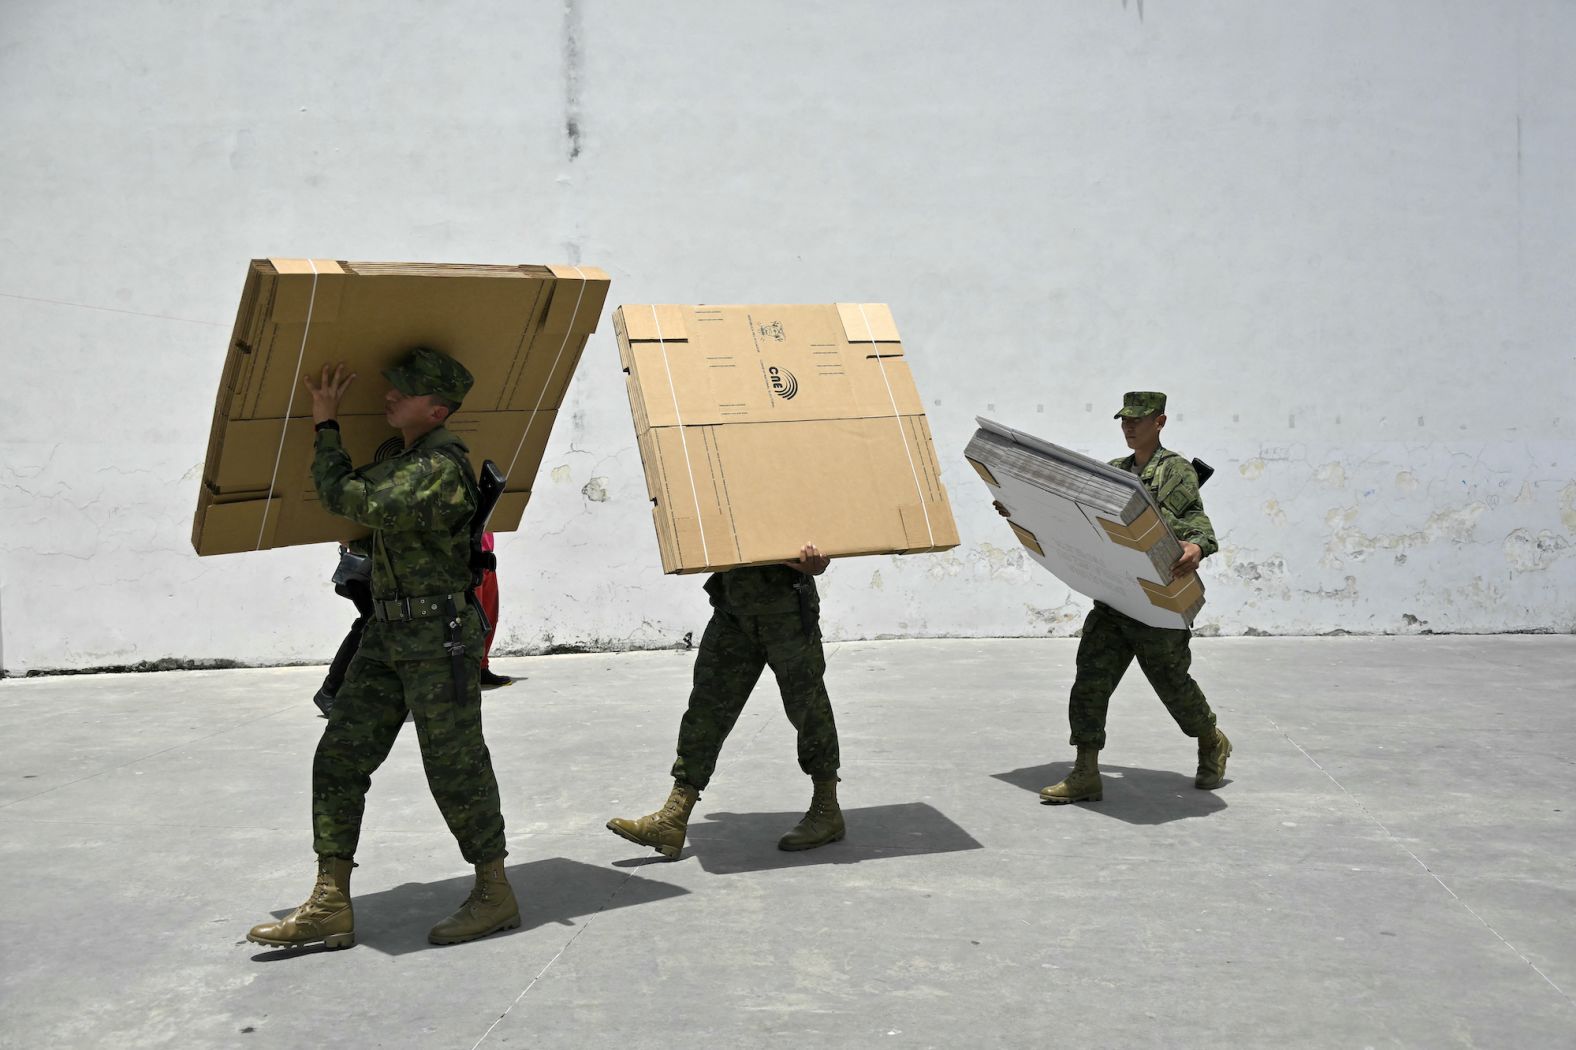 Soldiers carry electoral material at a school in Quito, Ecuador, on Saturday, April 20. <a href="https://www.cnn.com/2024/04/22/americas/ecuador-referendum-results-intl-latam/index.html" target="_blank">Early results from Ecuador's referendum Sunday</a> suggest President Daniel Noboa has won public backing for security measures aimed at boosting his war on crime.